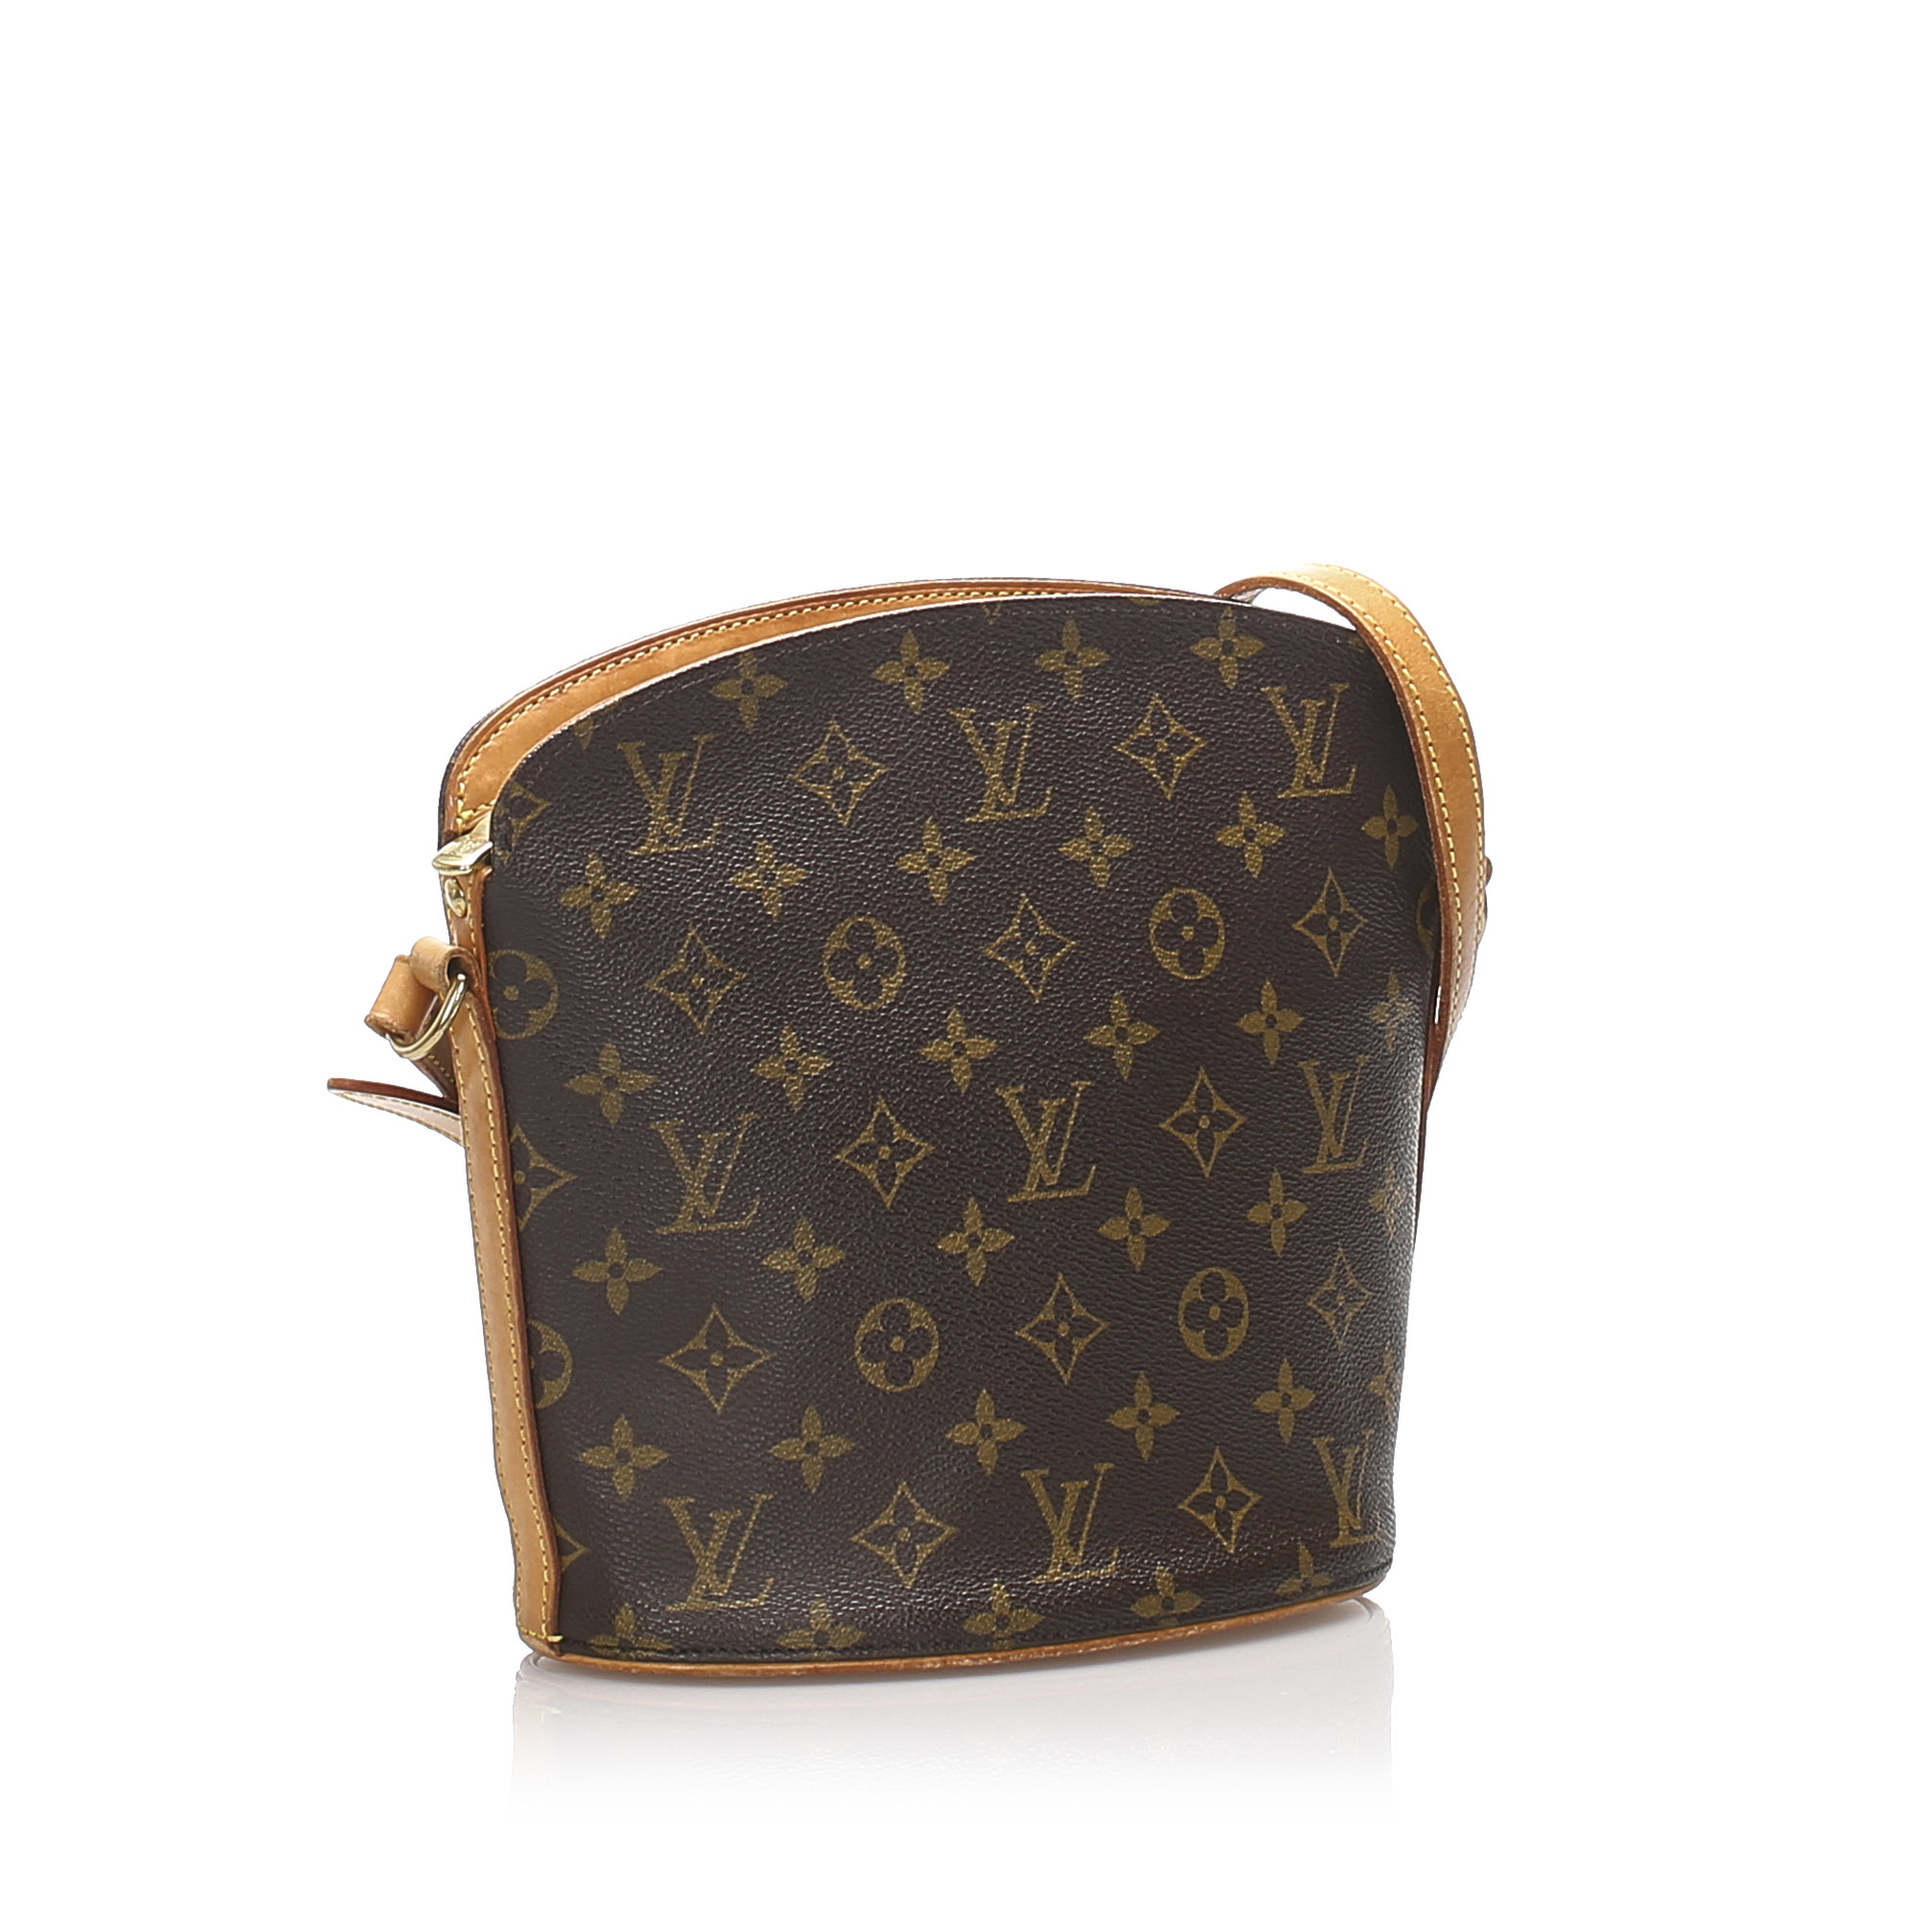 What Is Louis Vuitton Employee Discount